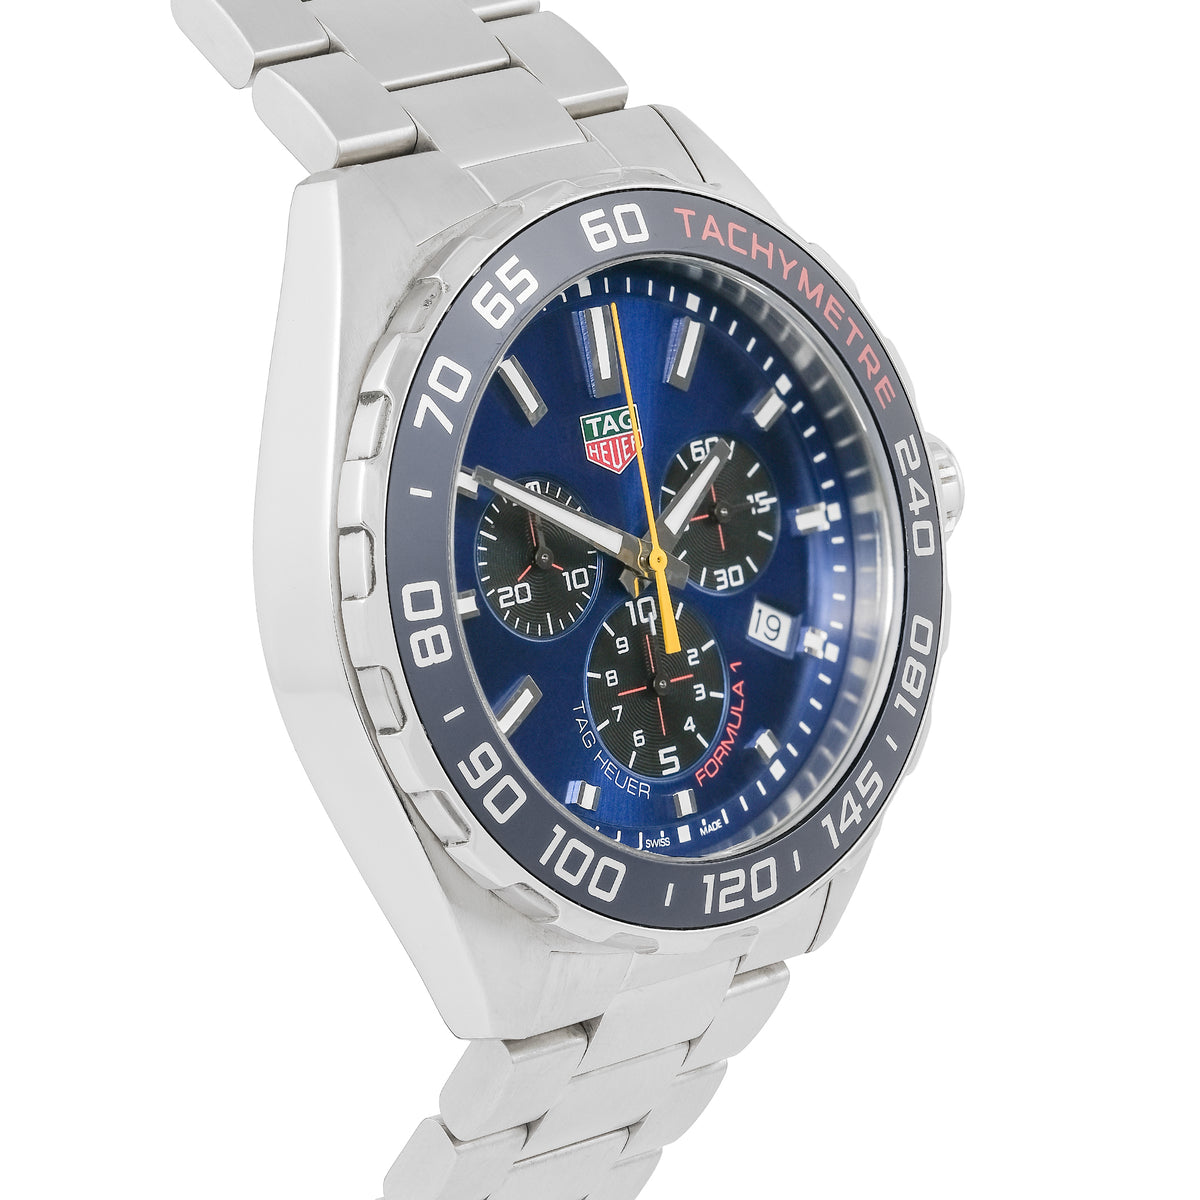 Tag Heuer F1 Red Bull Racing